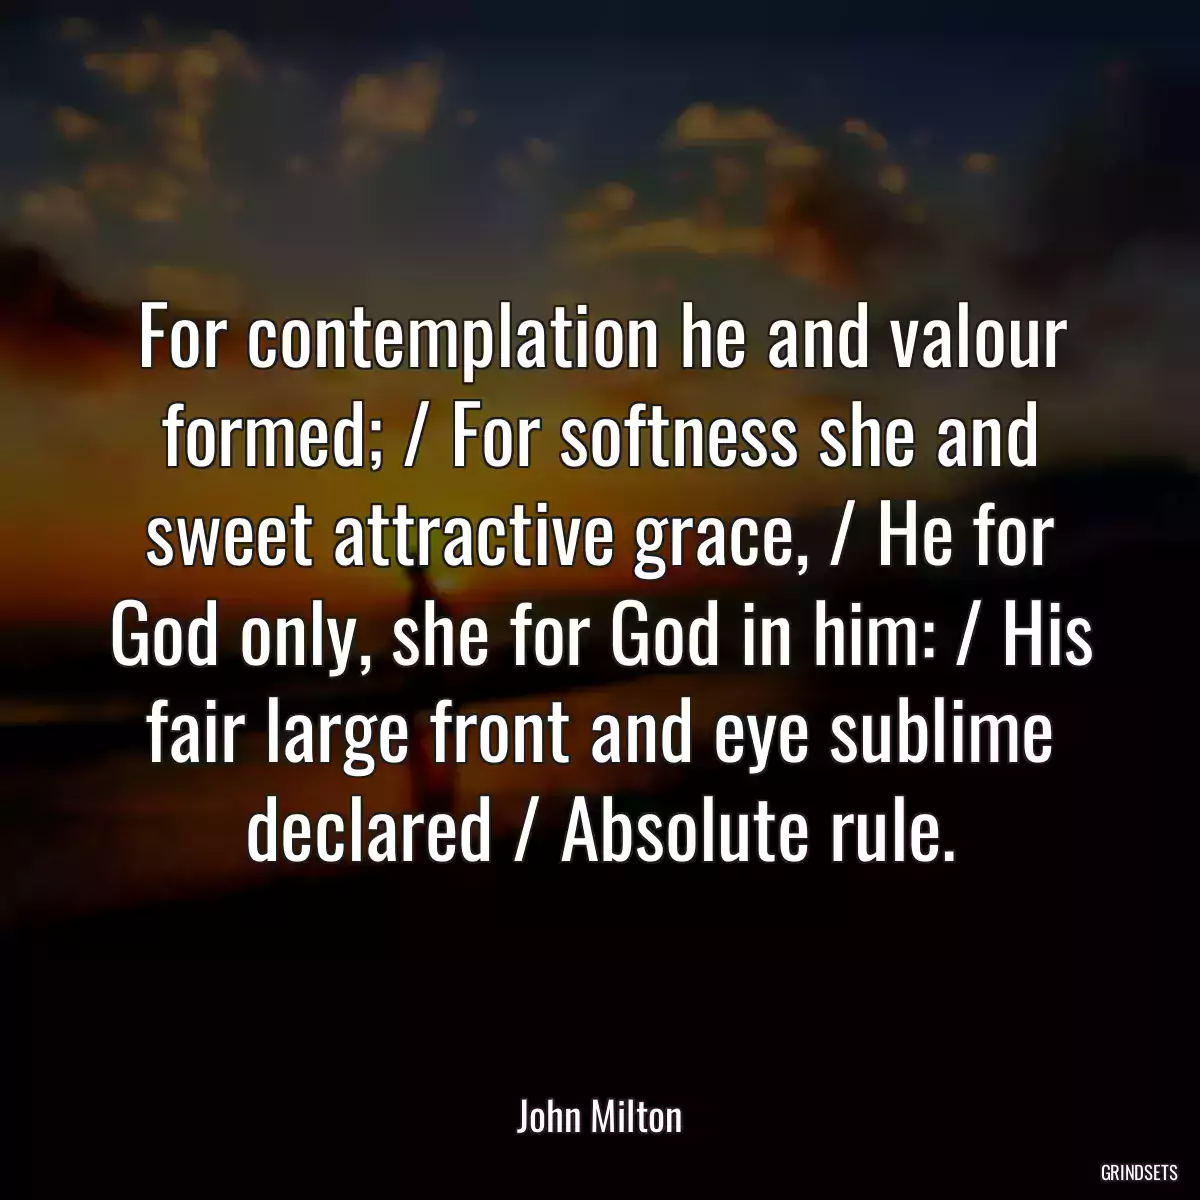 For contemplation he and valour formed; / For softness she and sweet attractive grace, / He for God only, she for God in him: / His fair large front and eye sublime declared / Absolute rule.